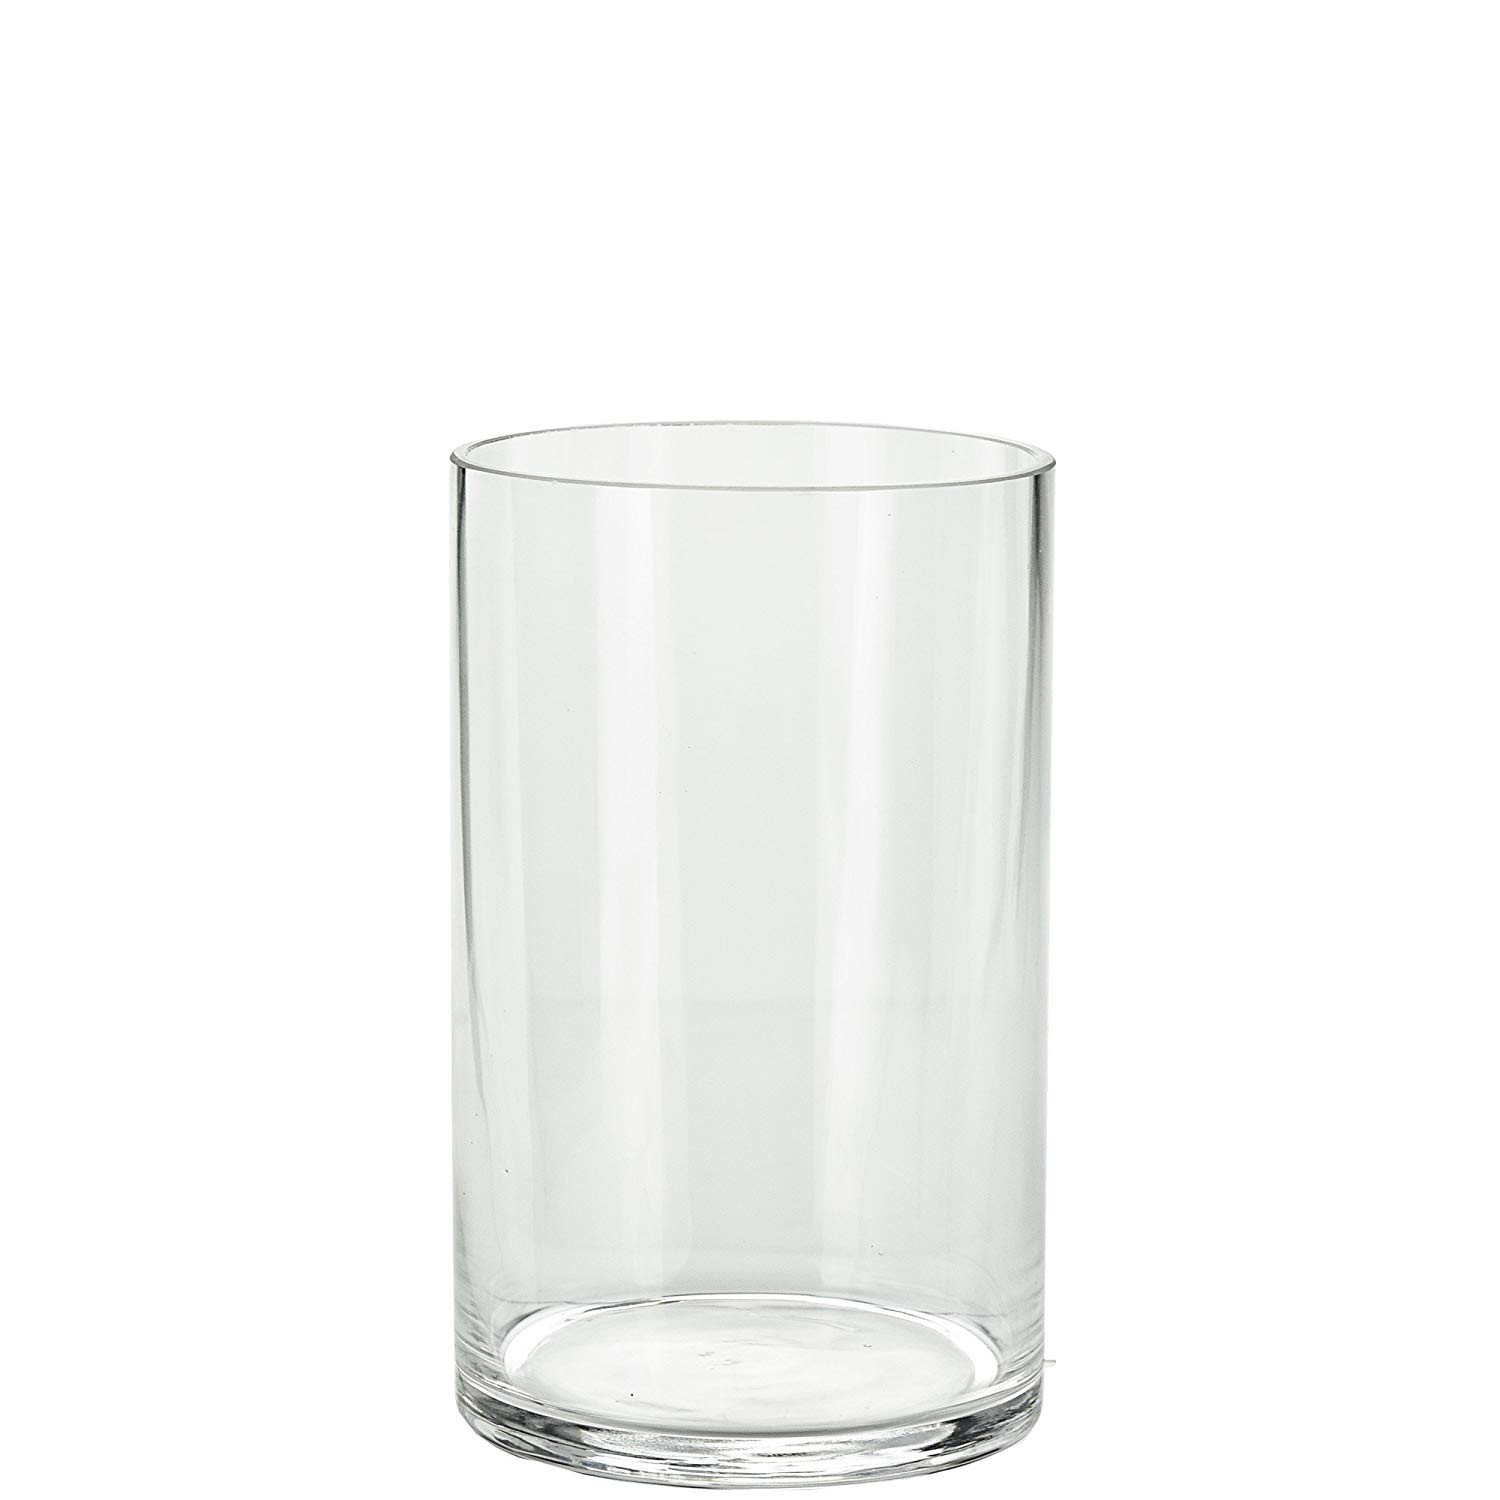 Libbey 6 Inch Cylinder Vase Of Amazon Com Couronne Company 7250 Large Cylinder Glass Vase 67 6 Oz with Amazon Com Couronne Company 7250 Large Cylinder Glass Vase 67 6 Oz Capacity Home Kitchen